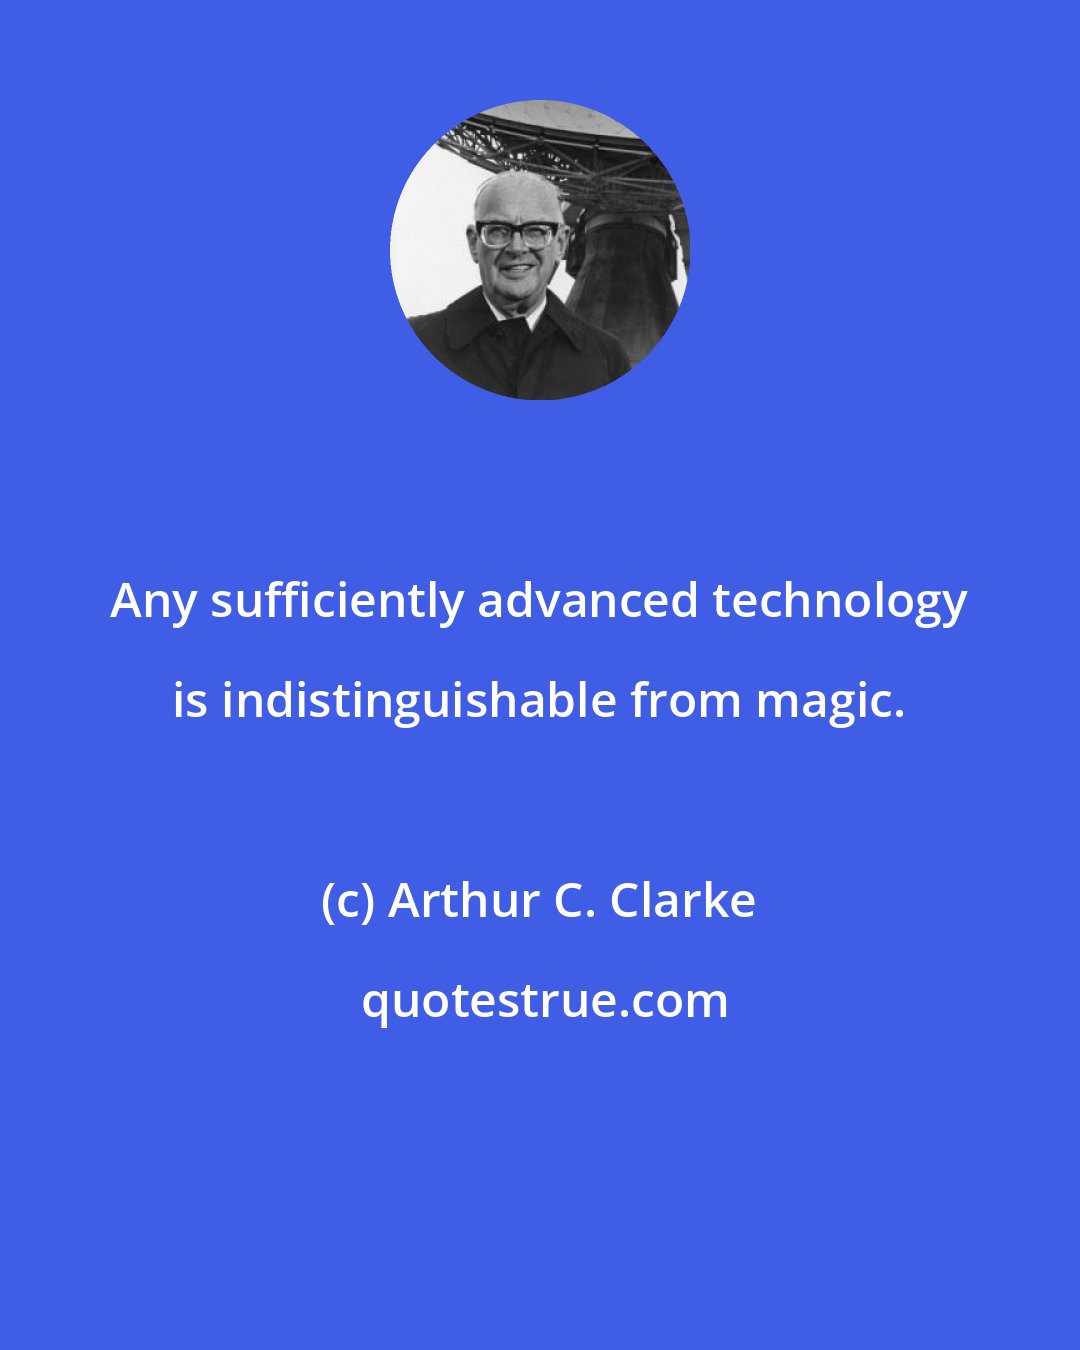 Arthur C. Clarke: Any sufficiently advanced technology is indistinguishable from magic.